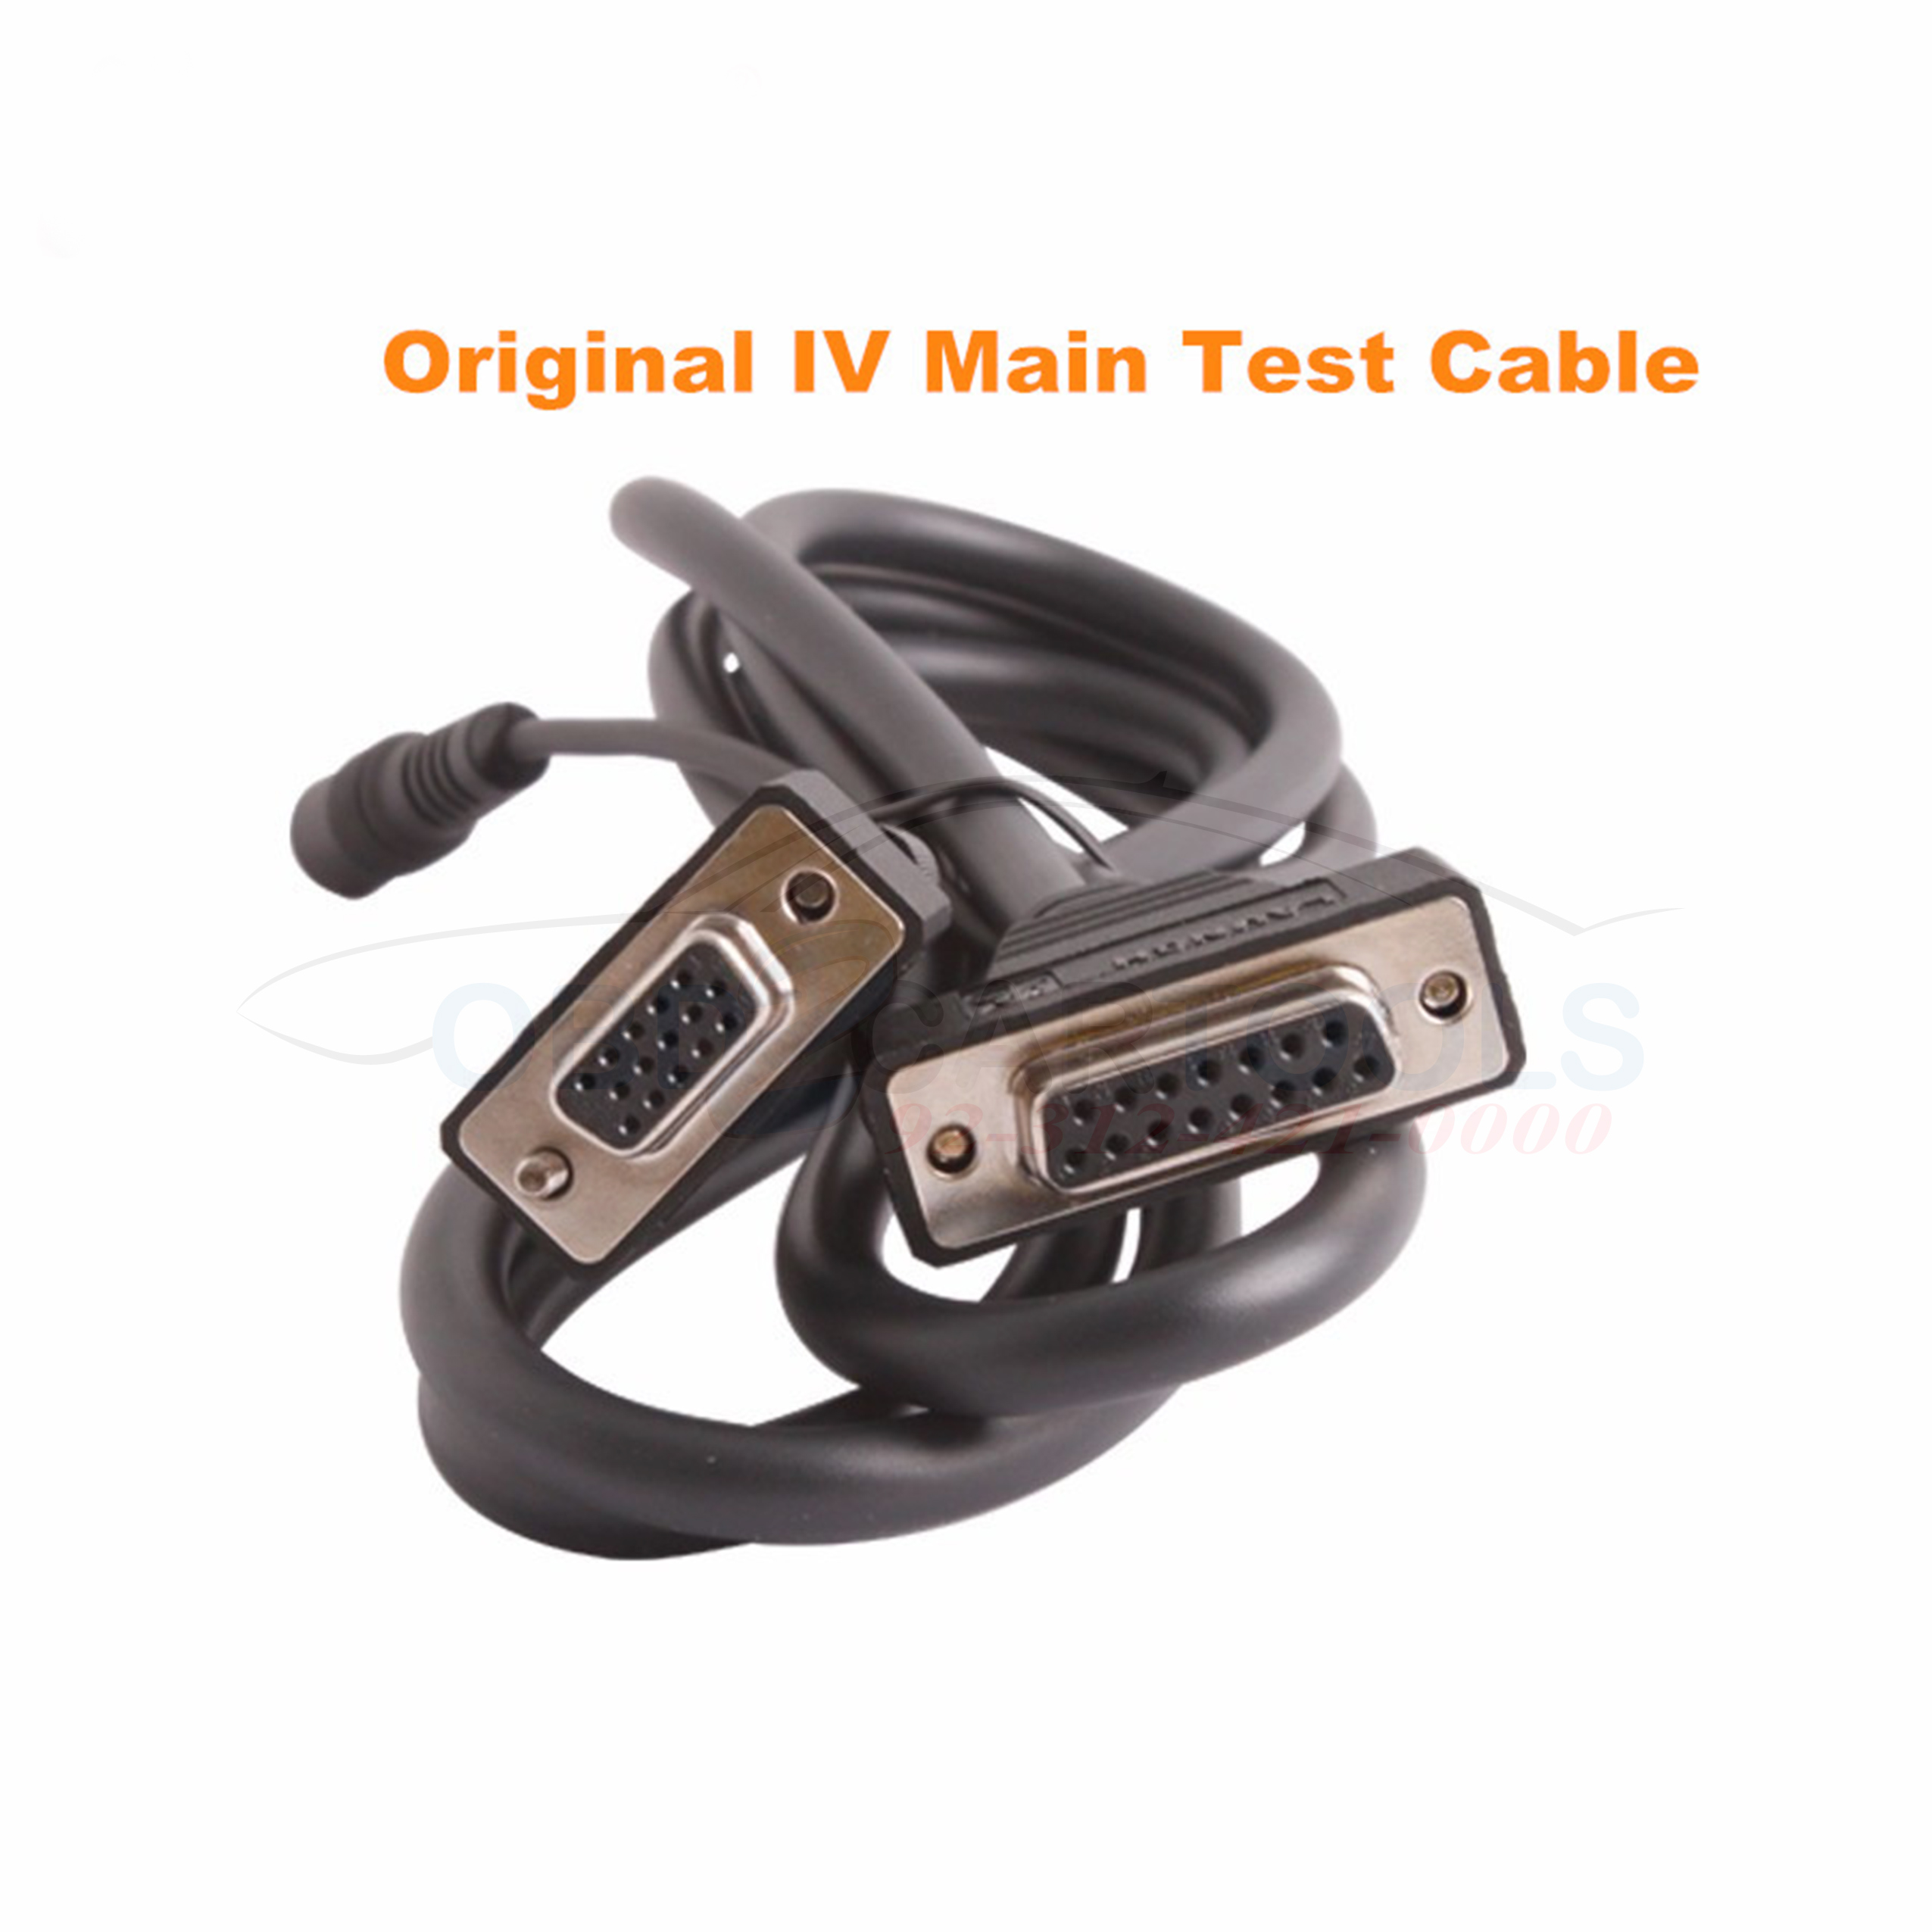 Product image for Original Launch X431 IV Main Test Cable X431 main cable for X431 IV